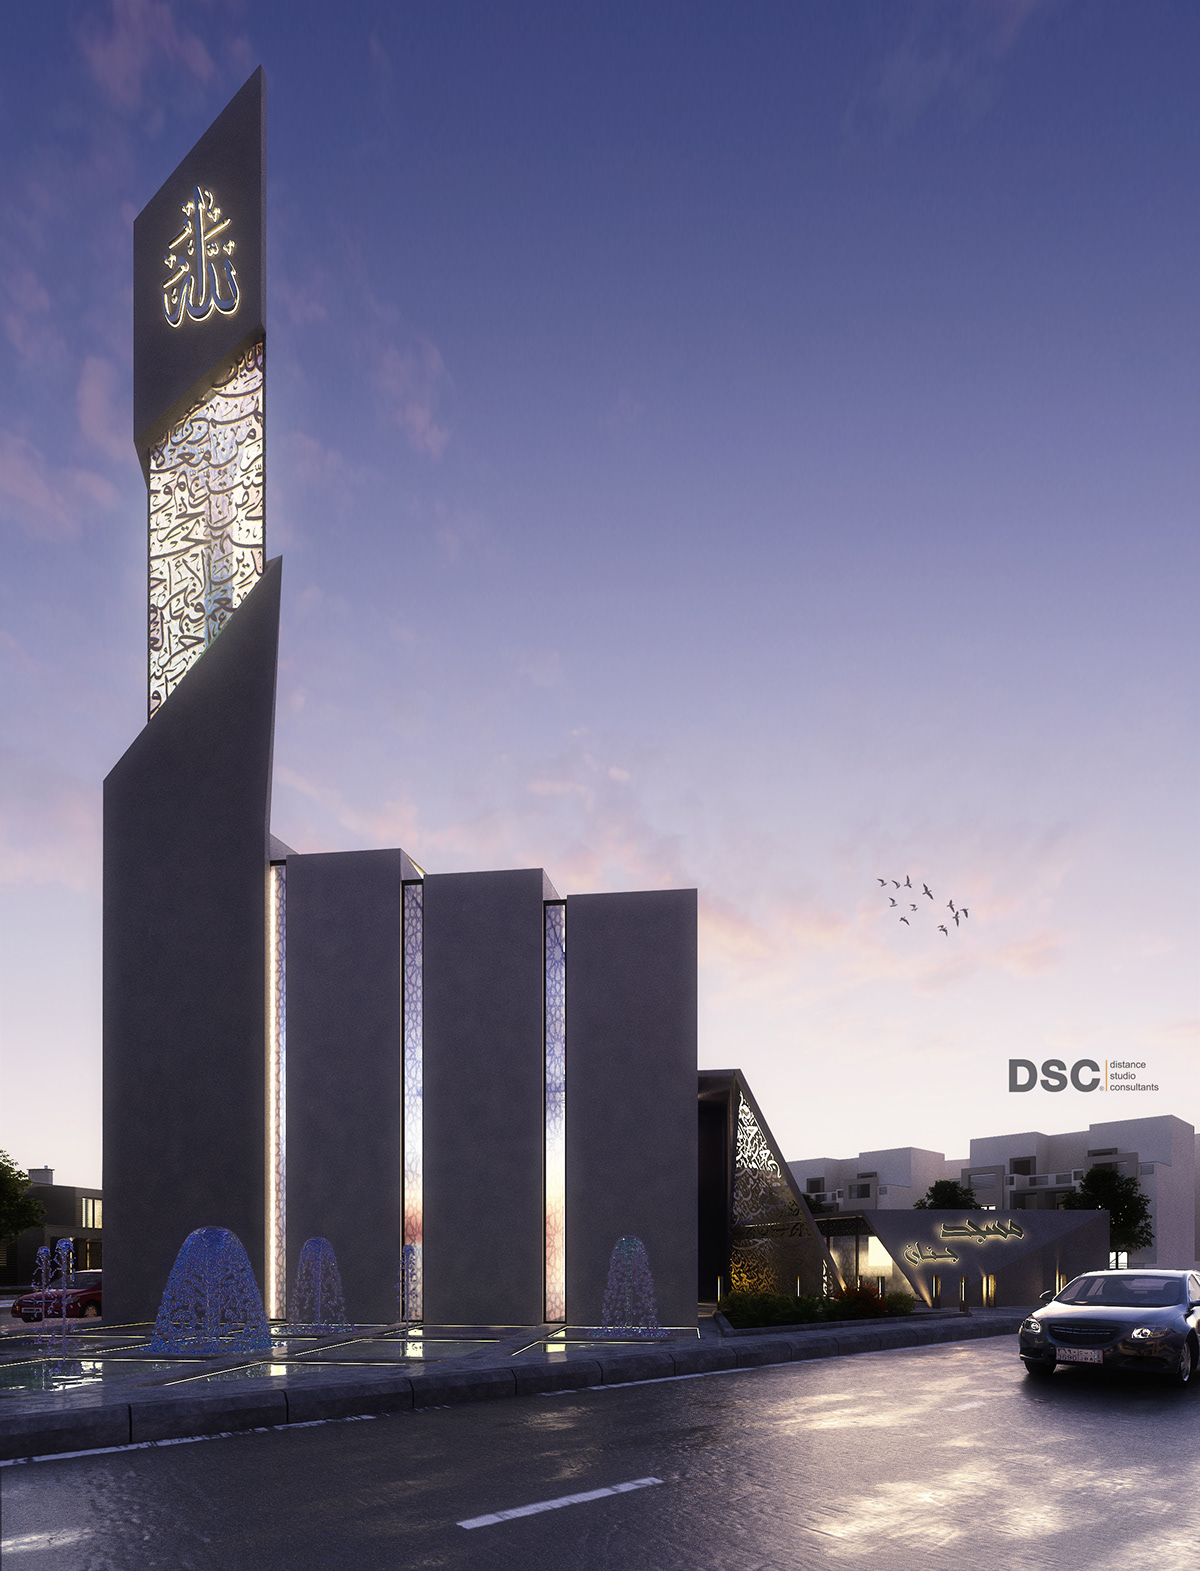 architecture mosque sacred prototype creative Competition iconic Minimalism abstract symbolism